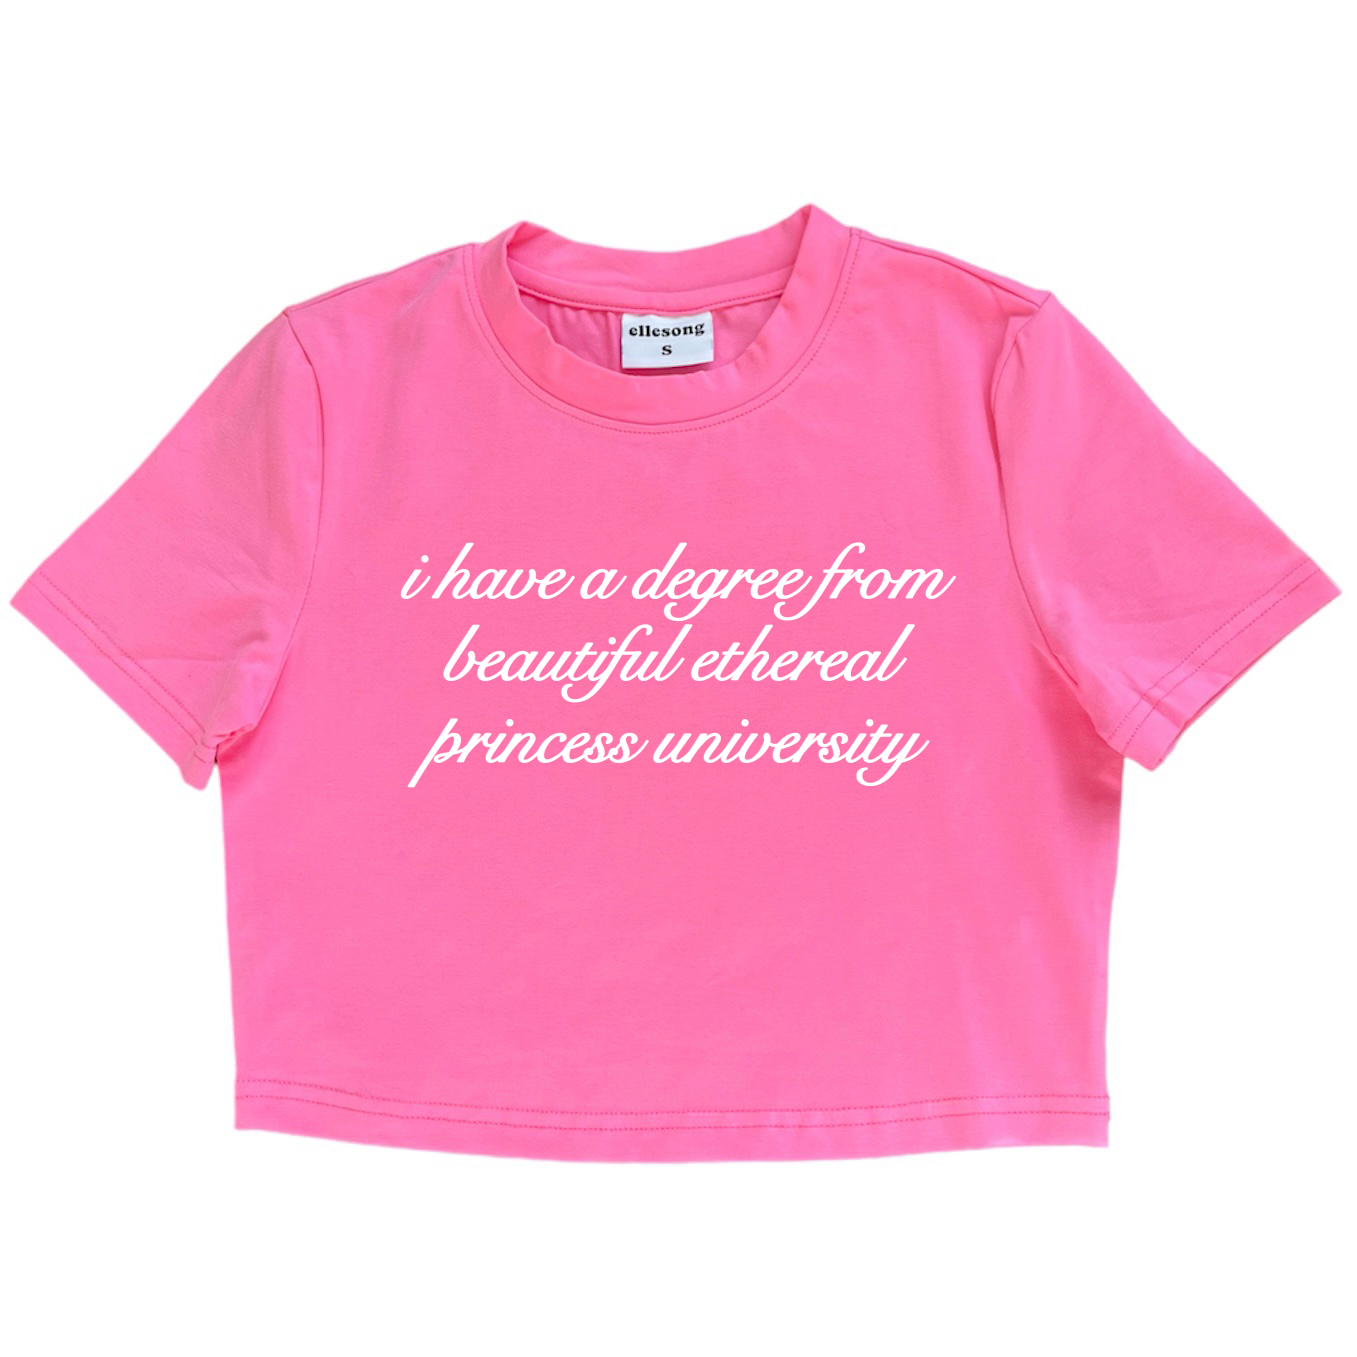 I Have A Degree From Beautiful Ethereal Princess University Baby Tee